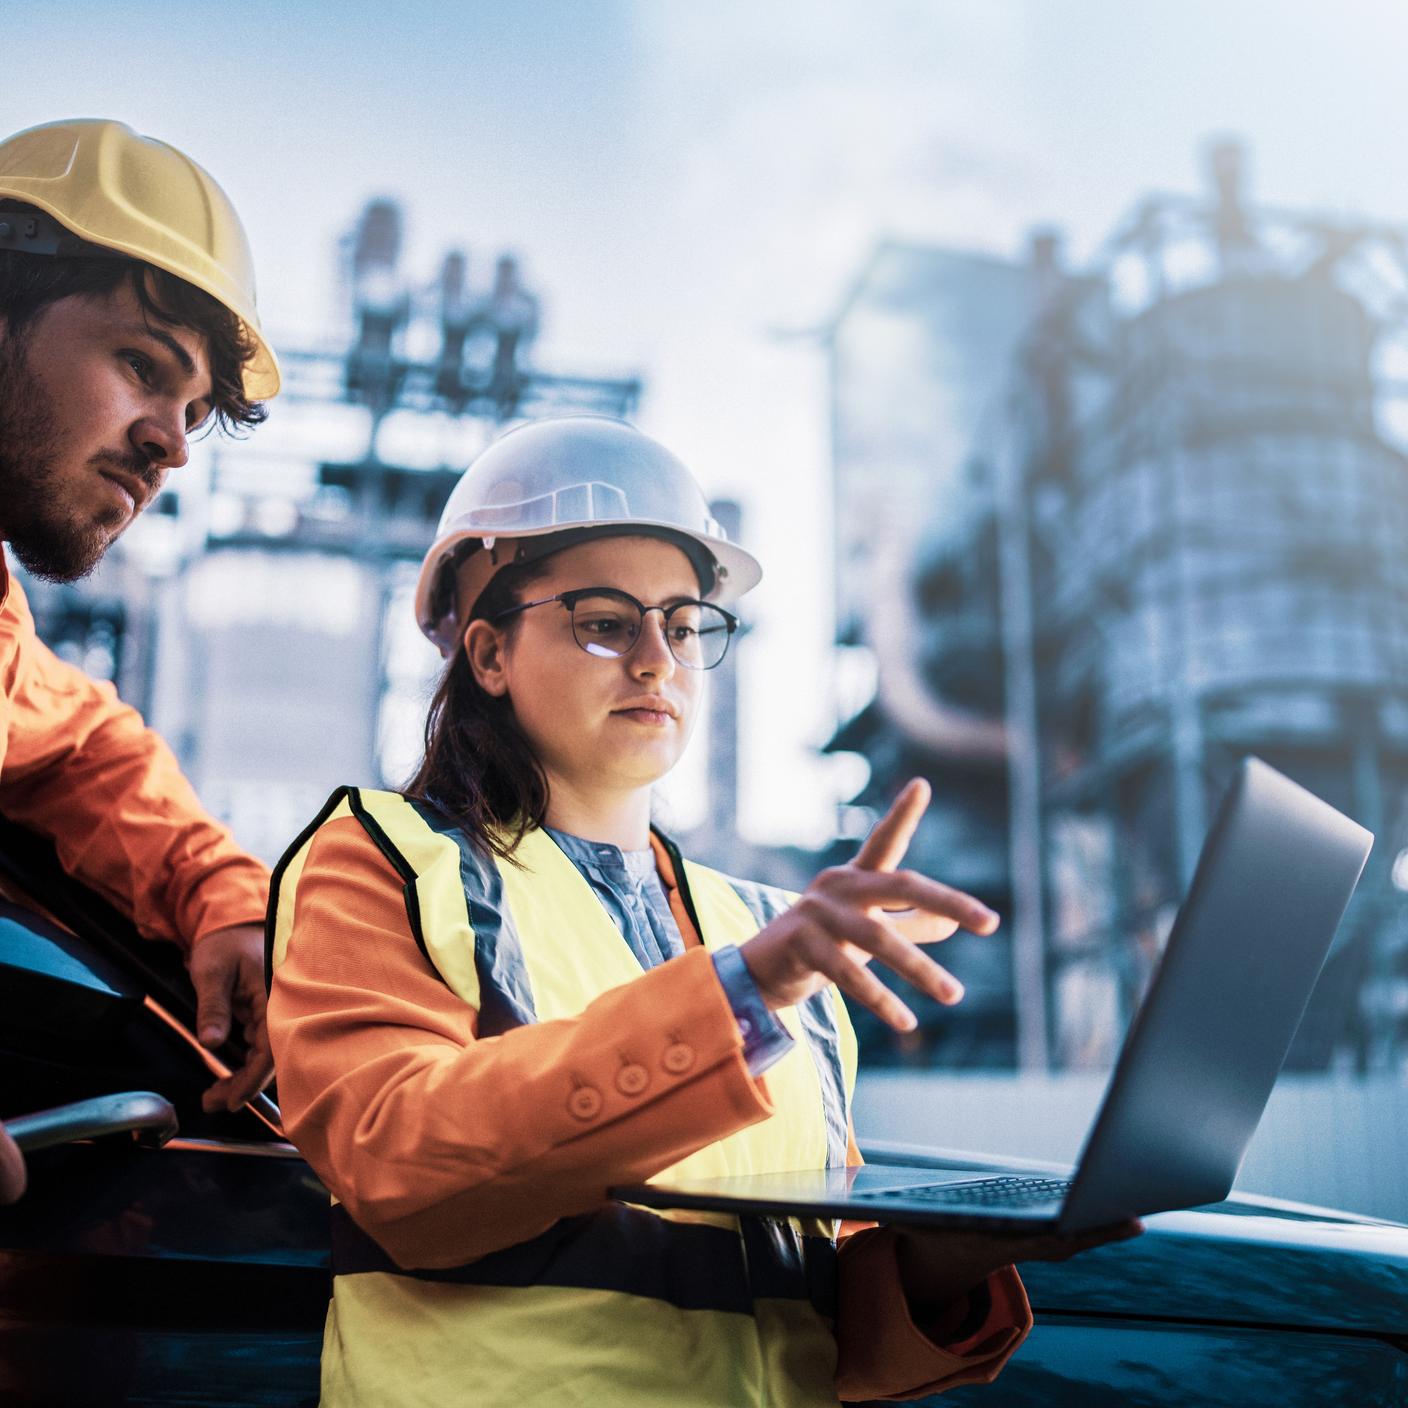 Two associates in safety attire reviewing data on a laptop in front of a power plant.